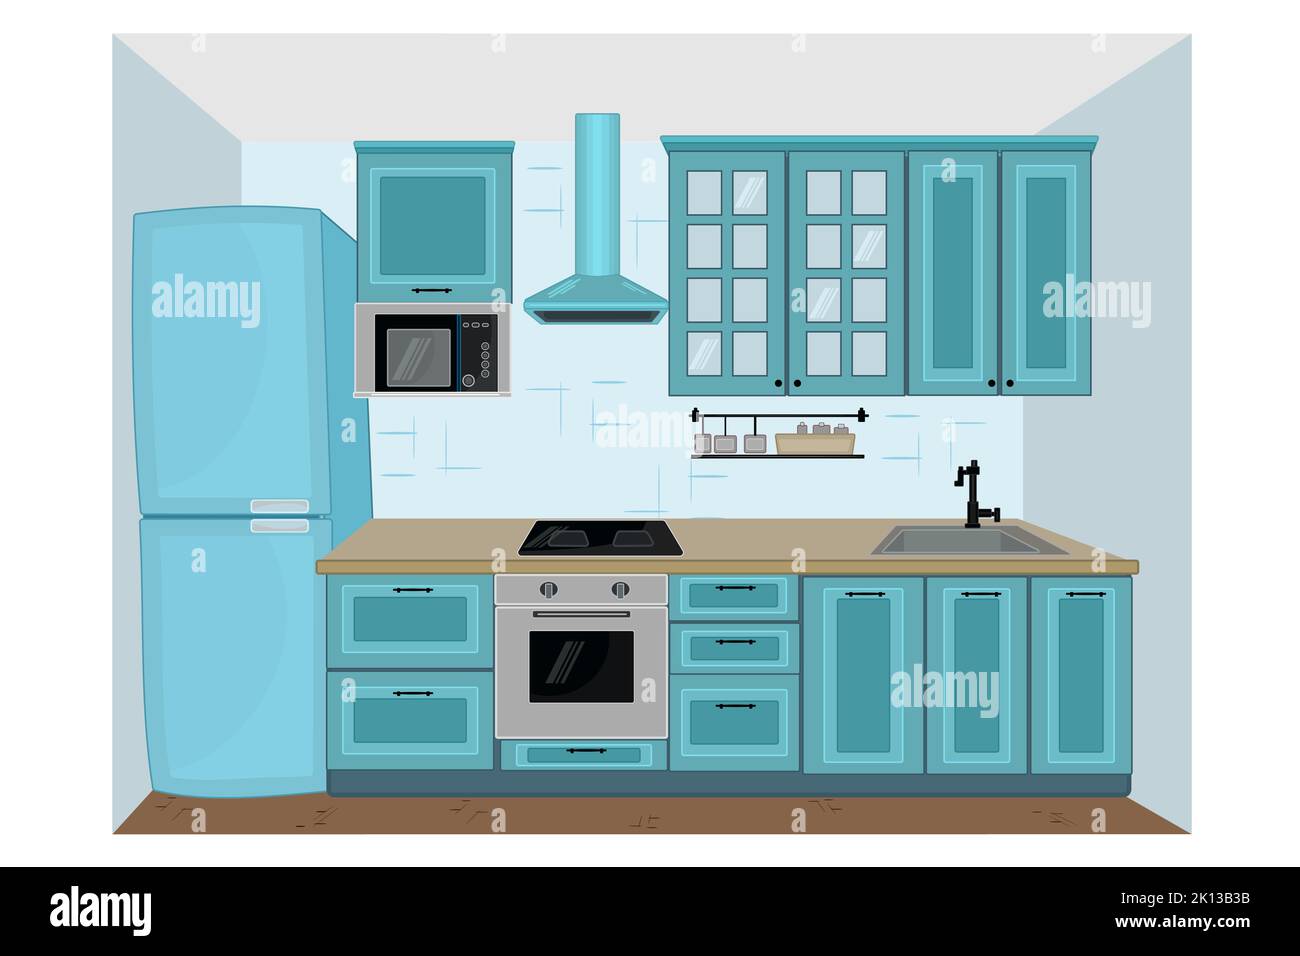 Kitchen interior.Kitchen with furniture,cupboard, fridge, stove, sink, microwave, shelf and range hood.Working surface for cooking.Vector Illustration Stock Vector